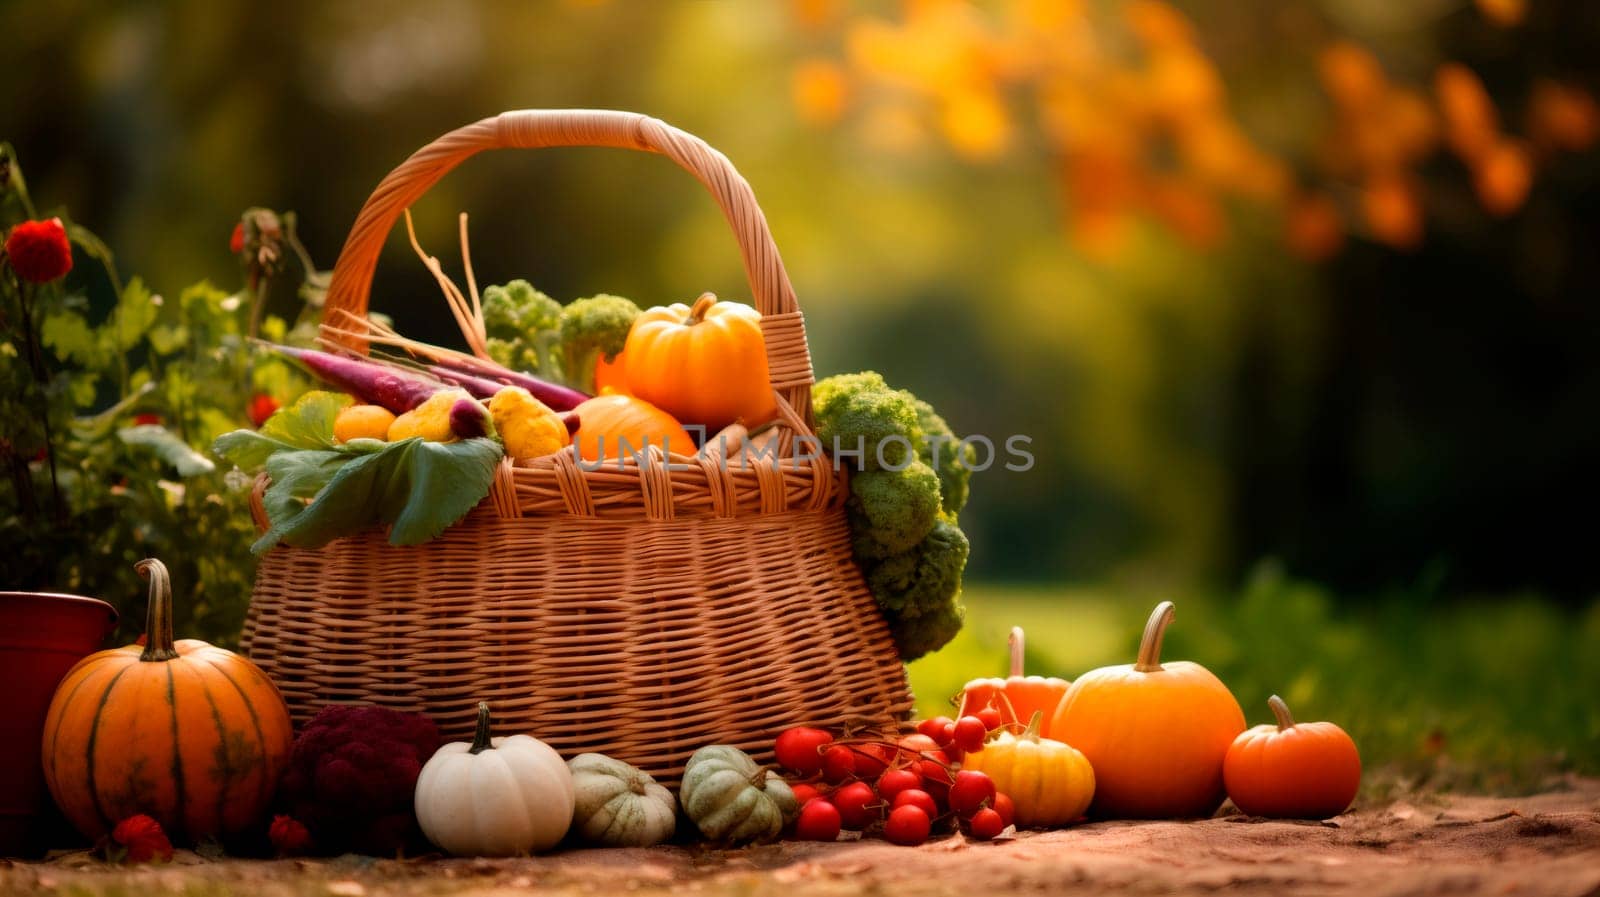 One wicker basket with a variety of autumn seasonal vegetables stands on a wooden table against a background of blurred colorful nature, side view close-up.